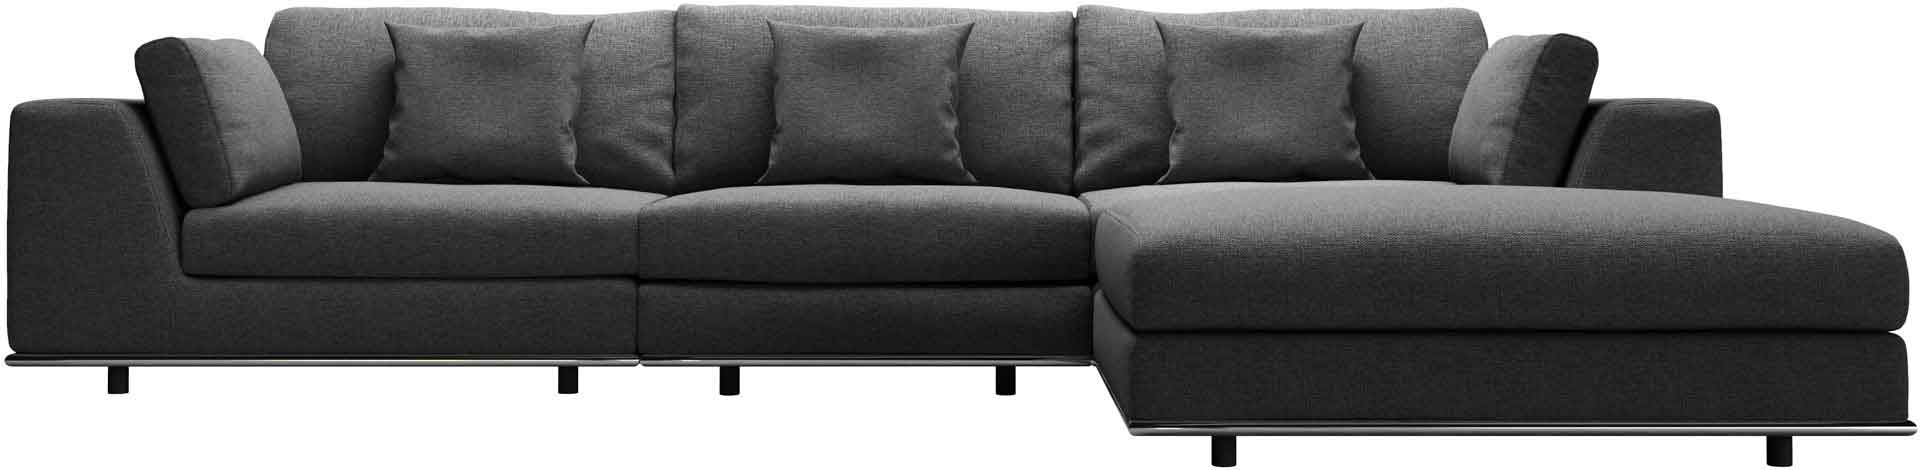 Perry Sectional Sofa Shadow Gray